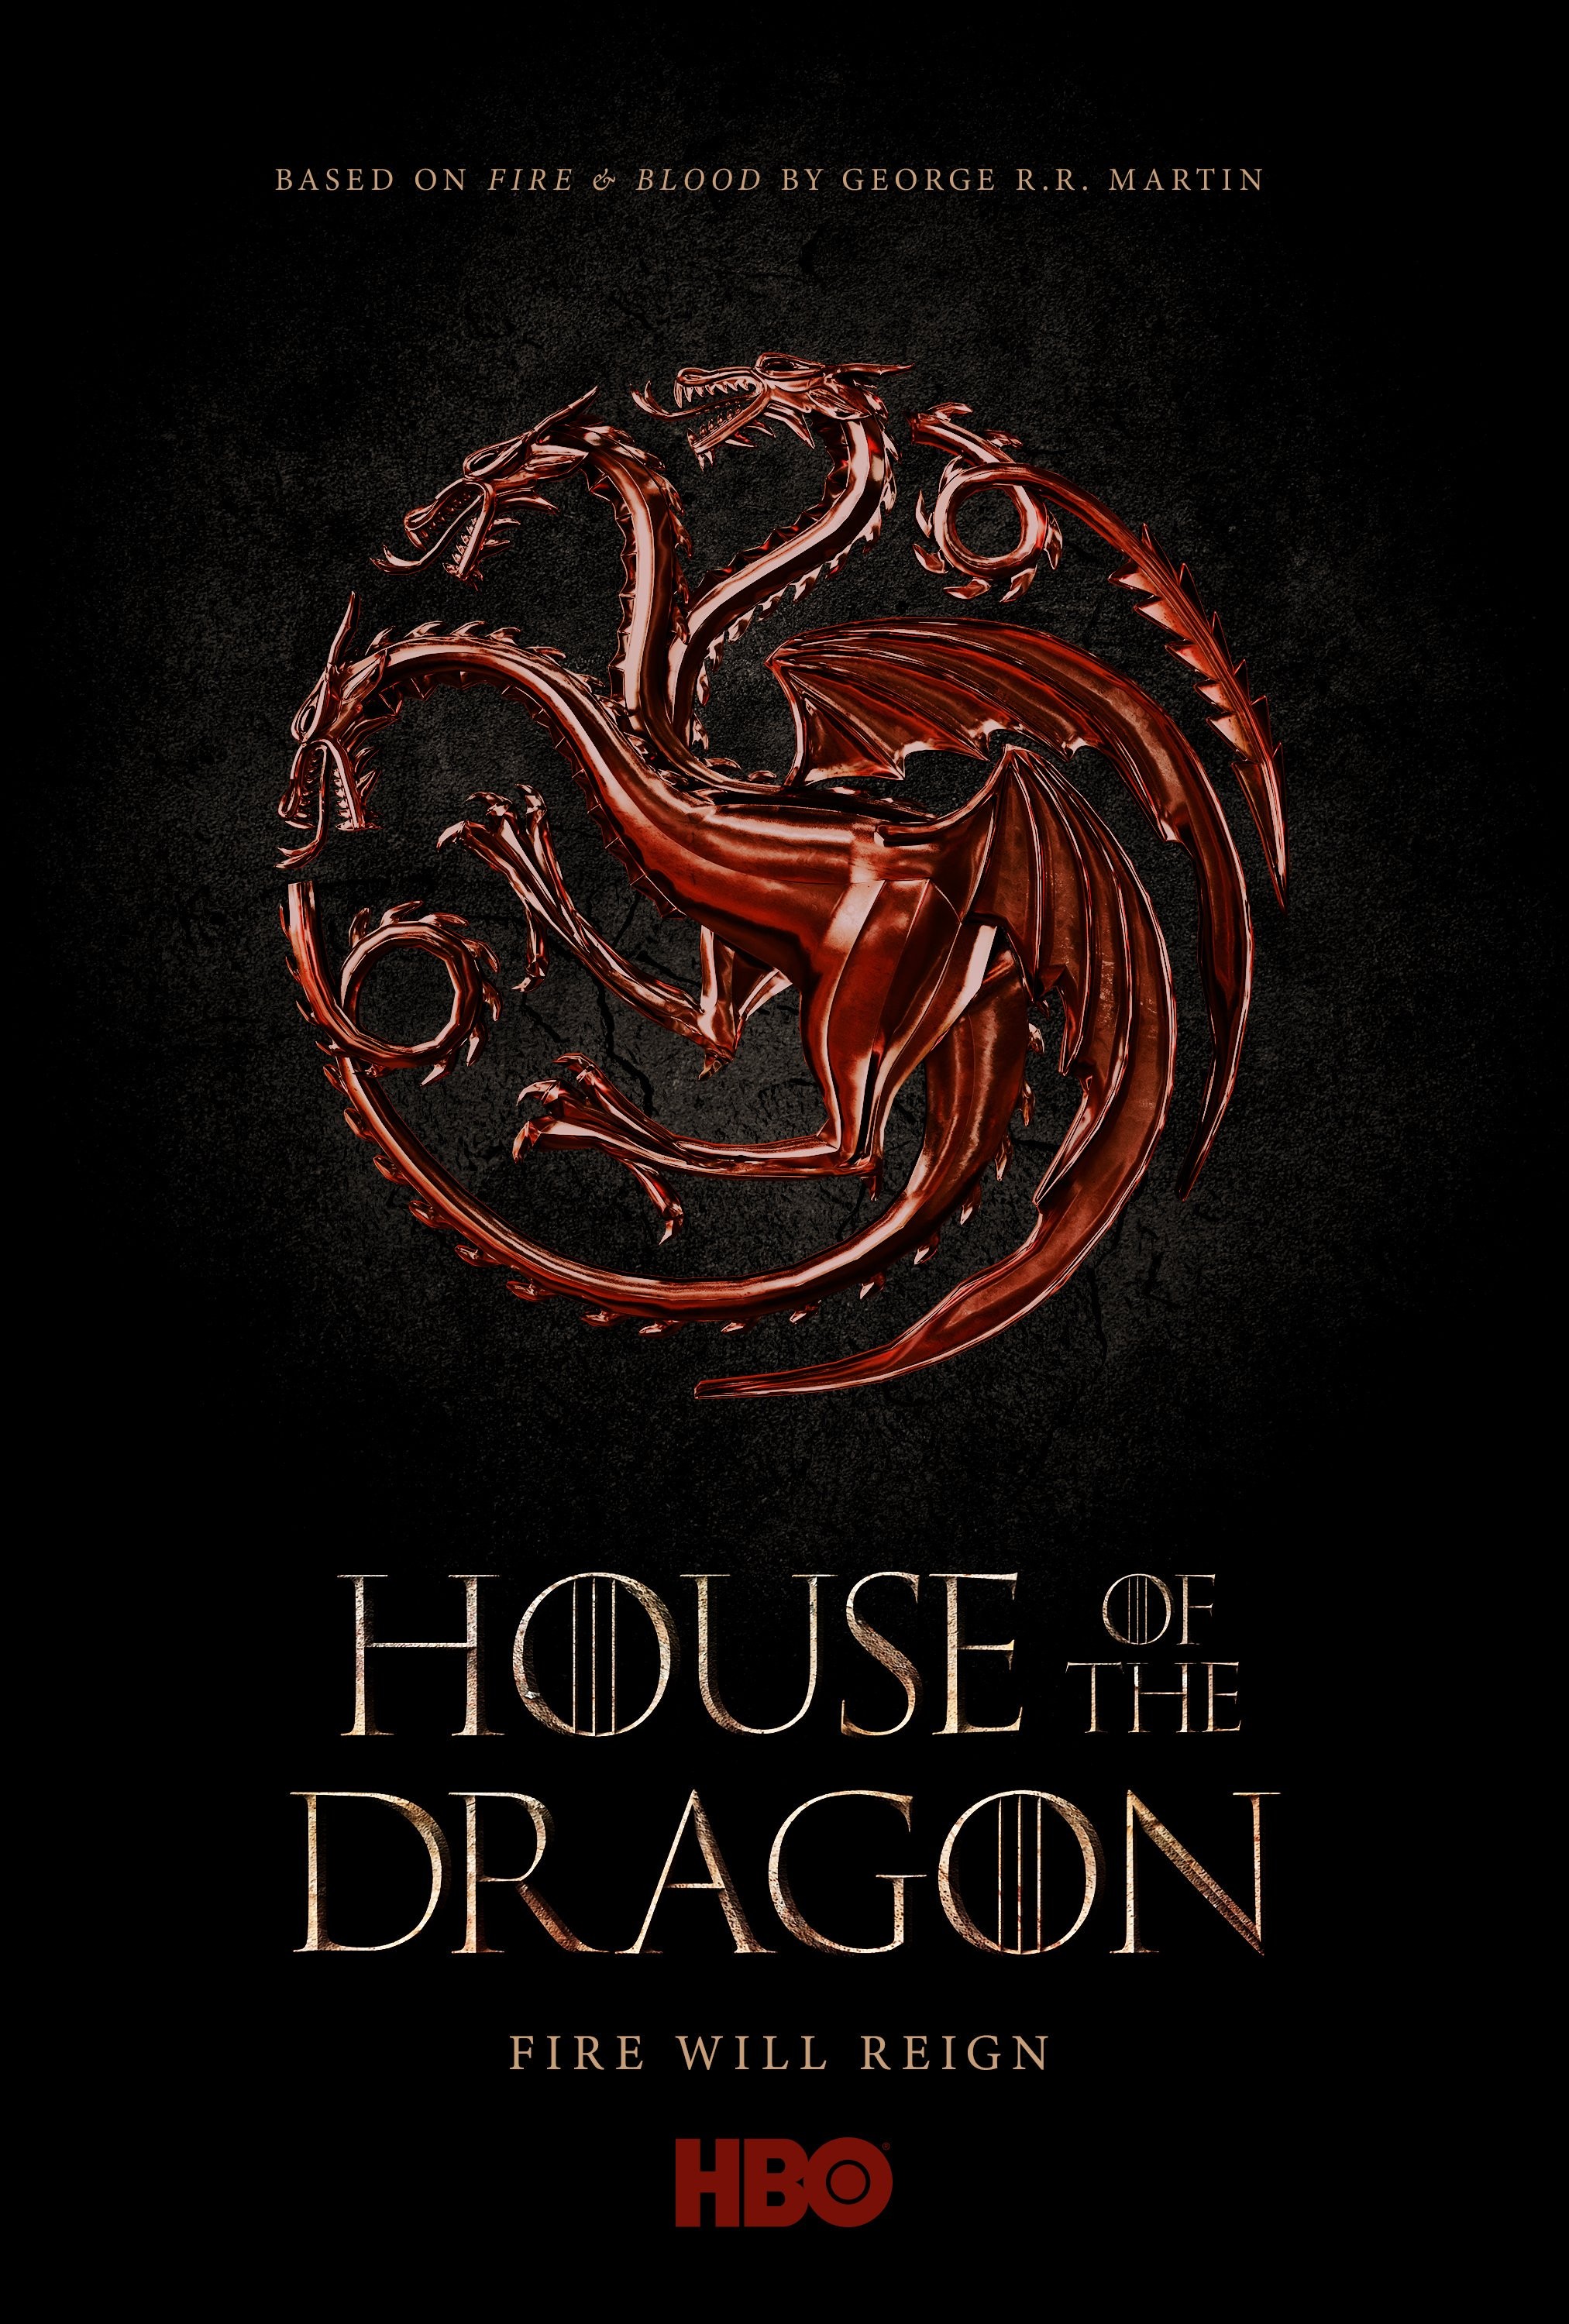 House of the Dragon - Rotten Tomatoes